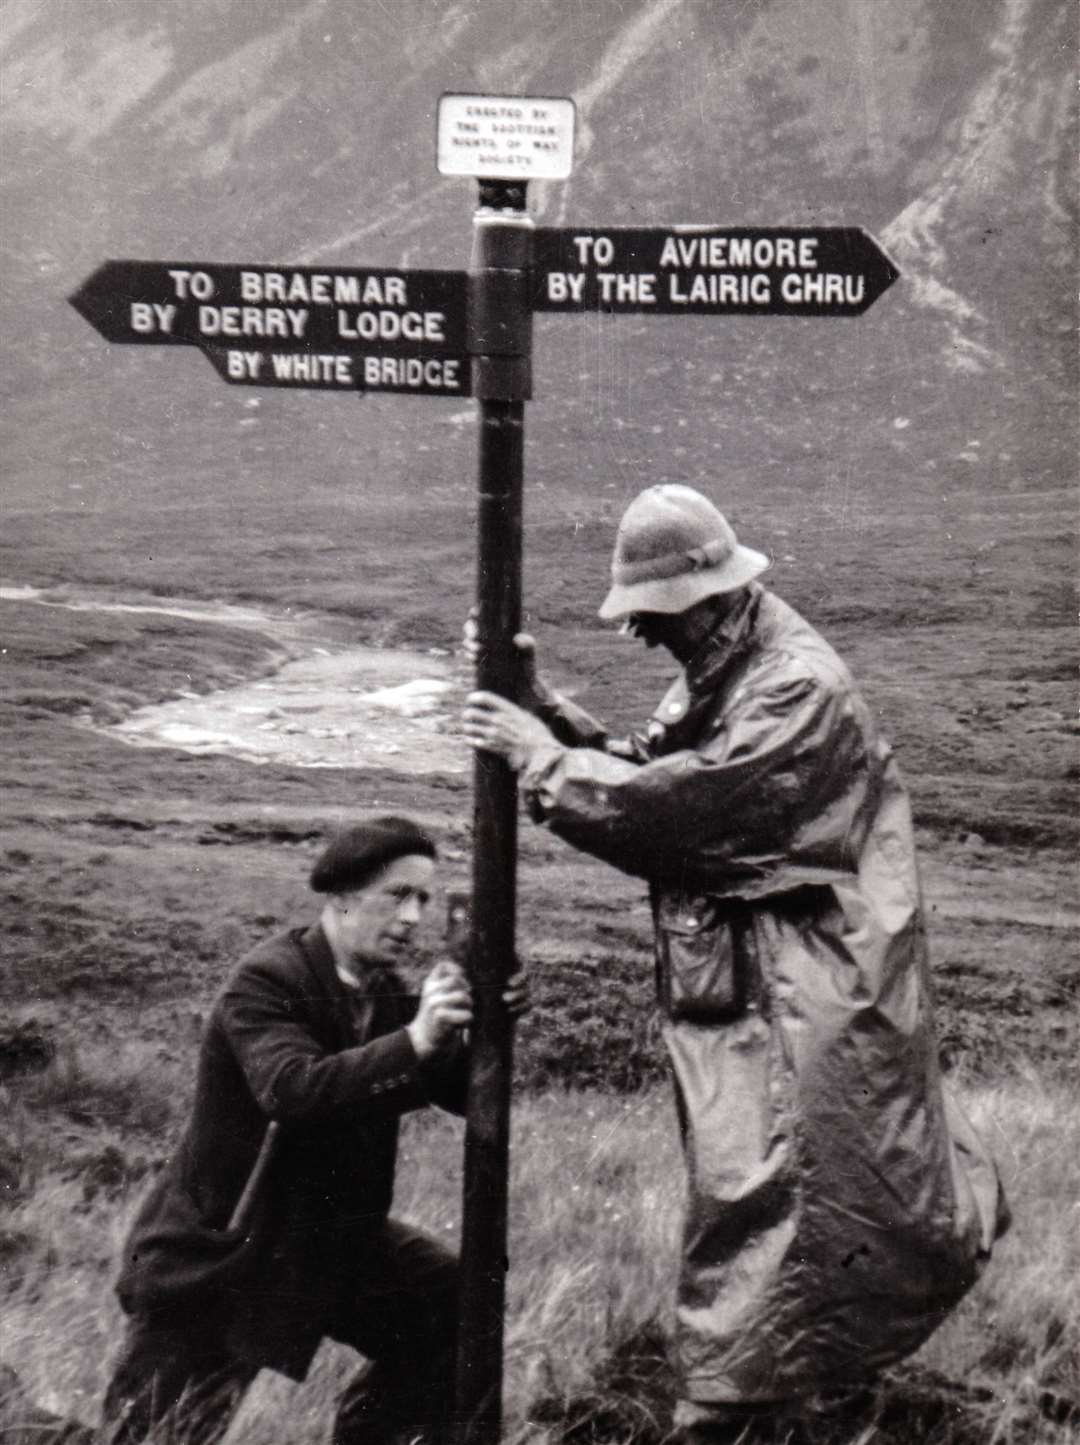 ScotWays signs were taken down at the start of World War 2 and then re-erected, like these after the war.